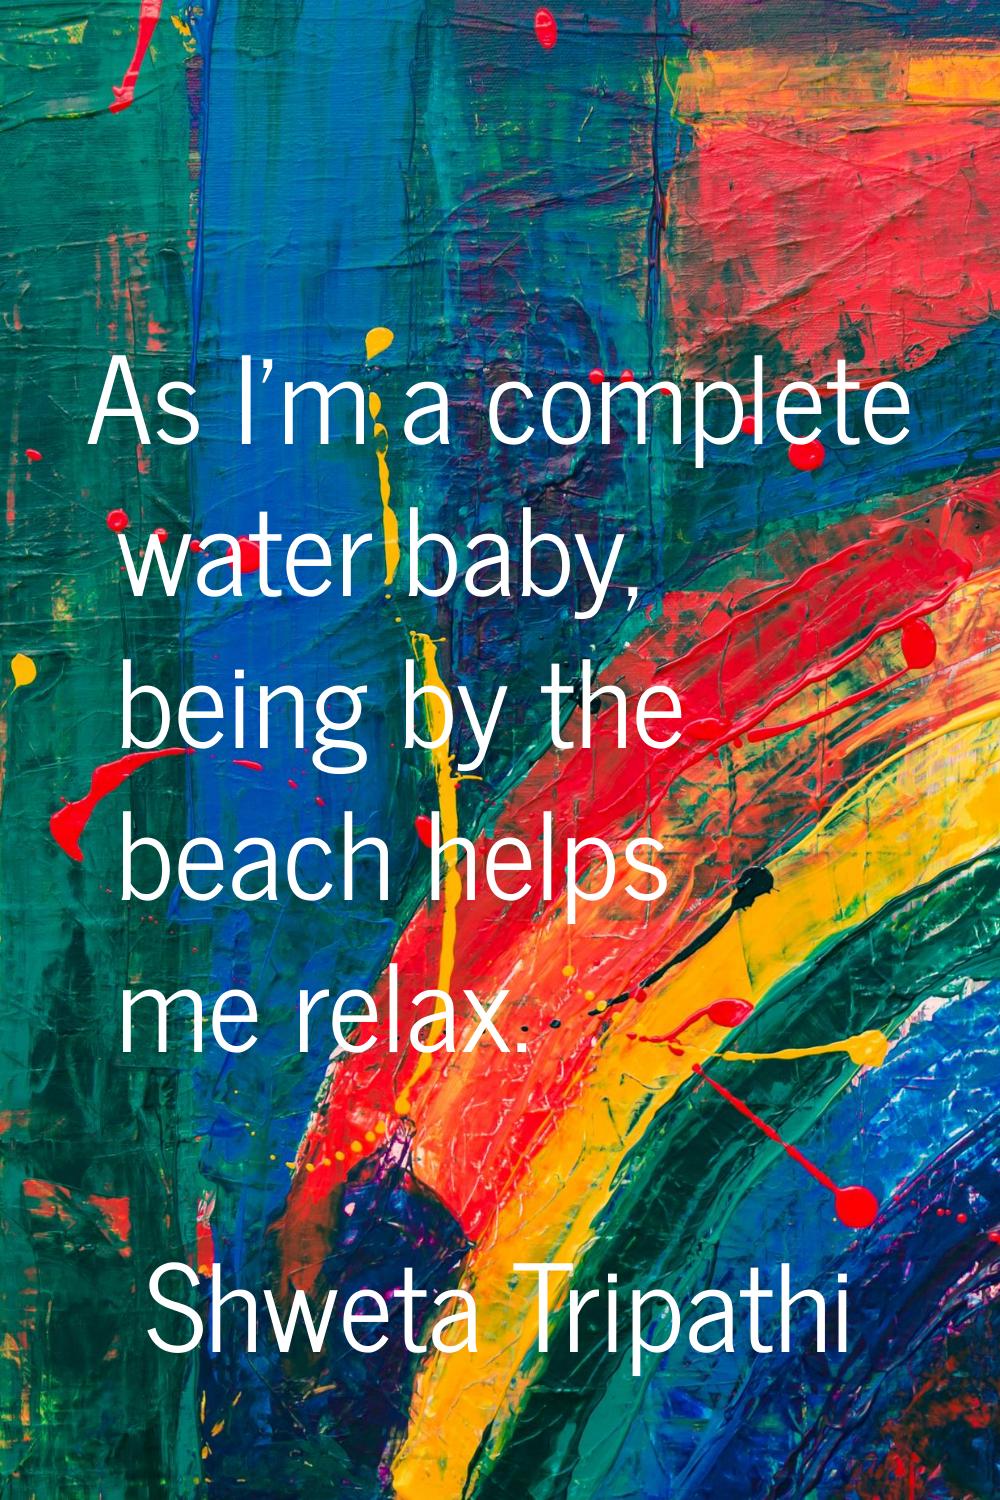 As I'm a complete water baby, being by the beach helps me relax.